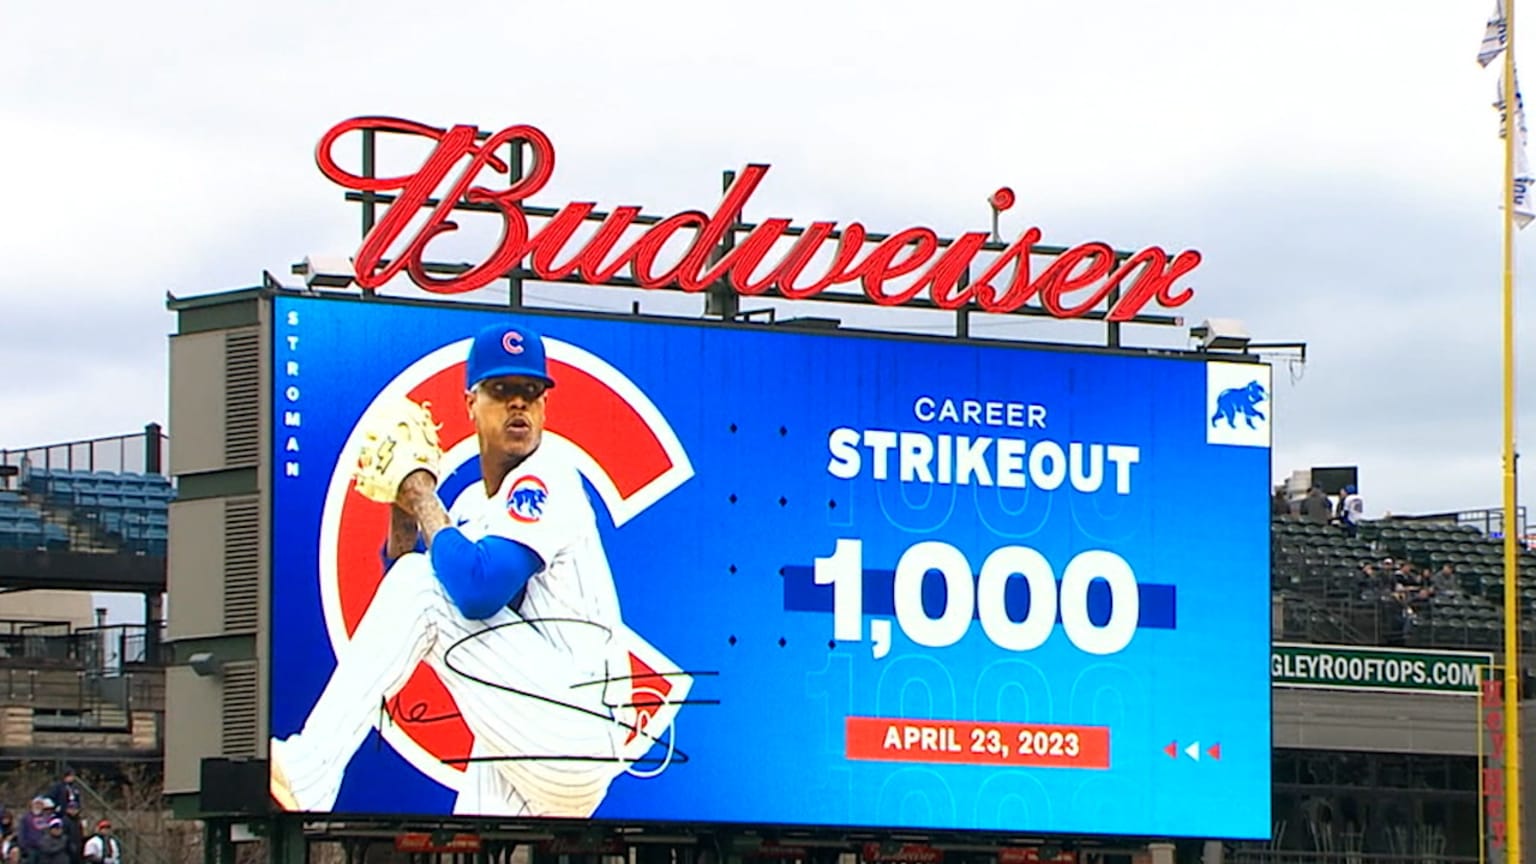 Stroman records 1,000th strikeout 04/23/2023 Chicago Cubs